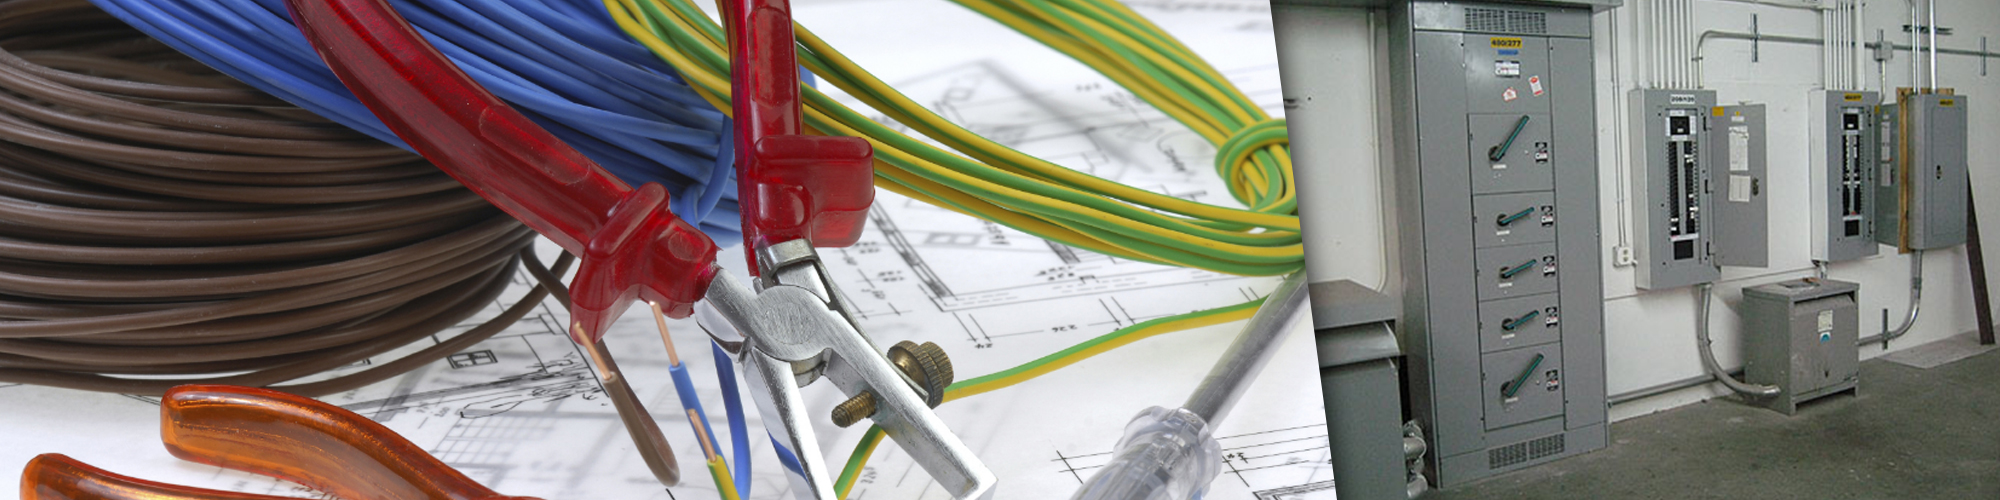 Whether you need help with rewiring or lighting installations in Hudson, FL, turn to Shore Commercial Inc.